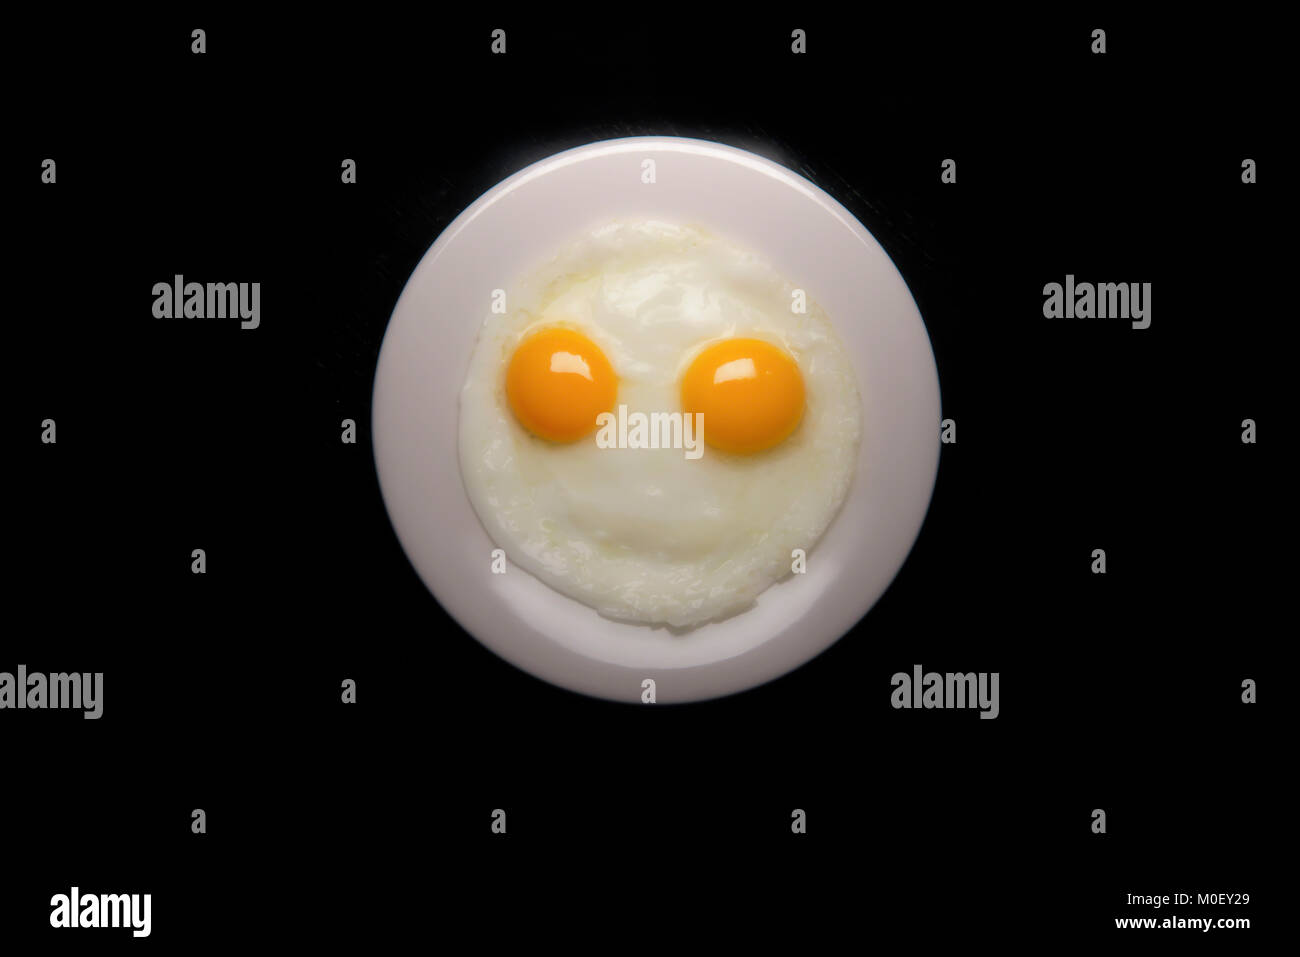 Smiley face made with fried eggs Stock Photo